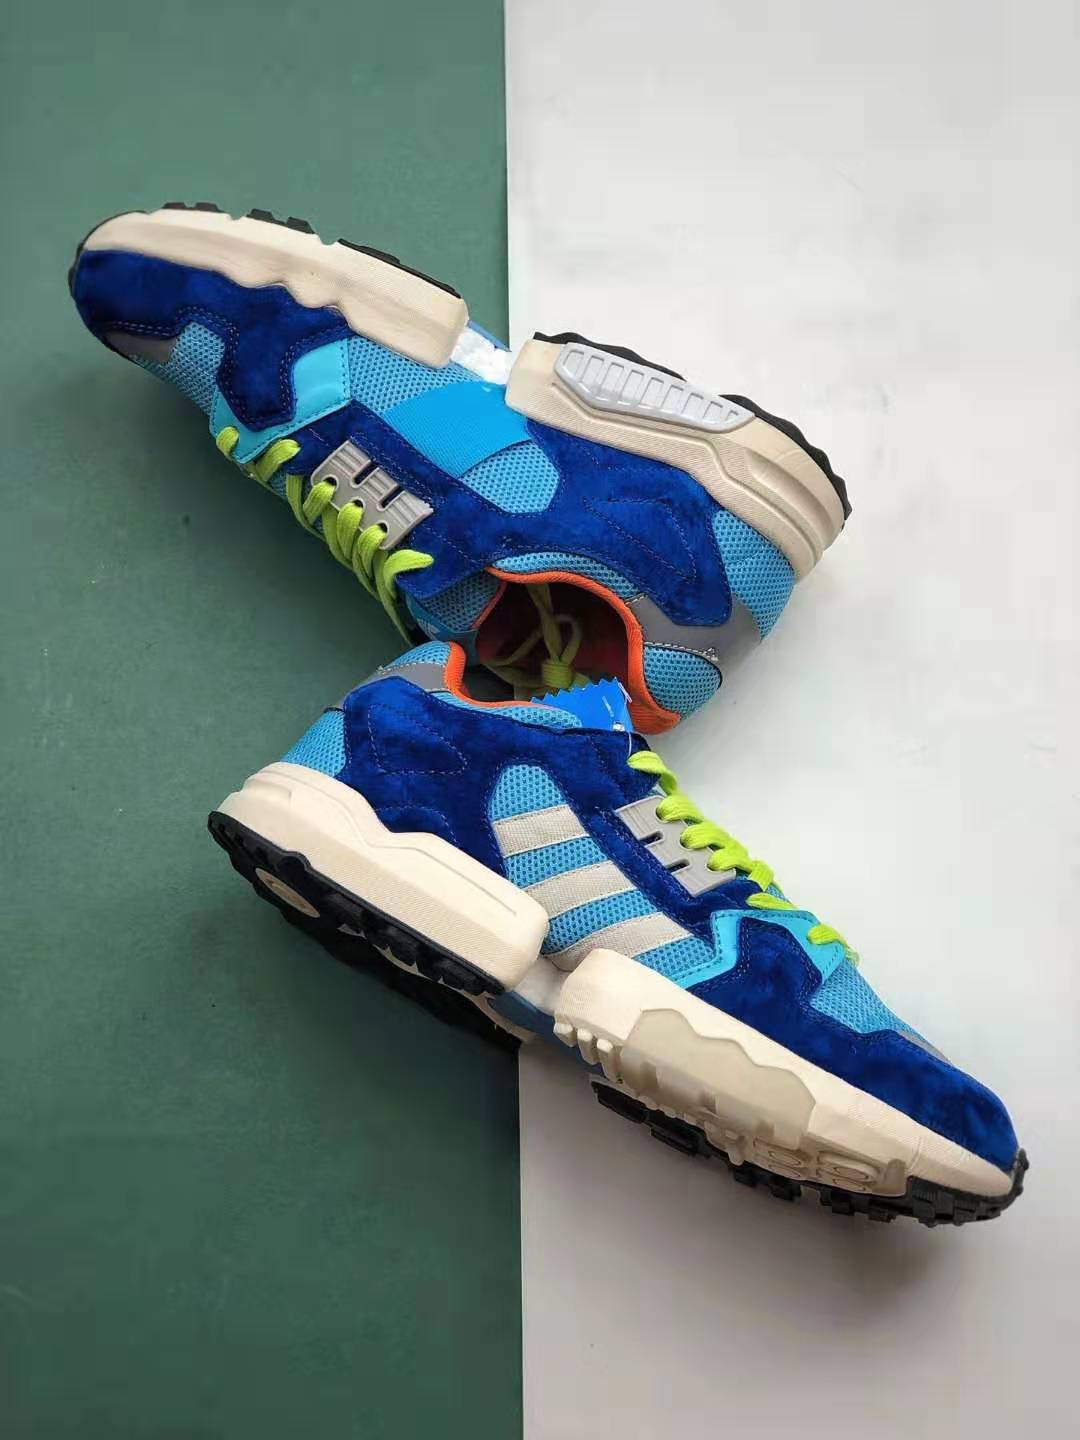 Adidas ZX Torsion Bright Cyan EE4787 - Stylish and Comfortable Sneakers